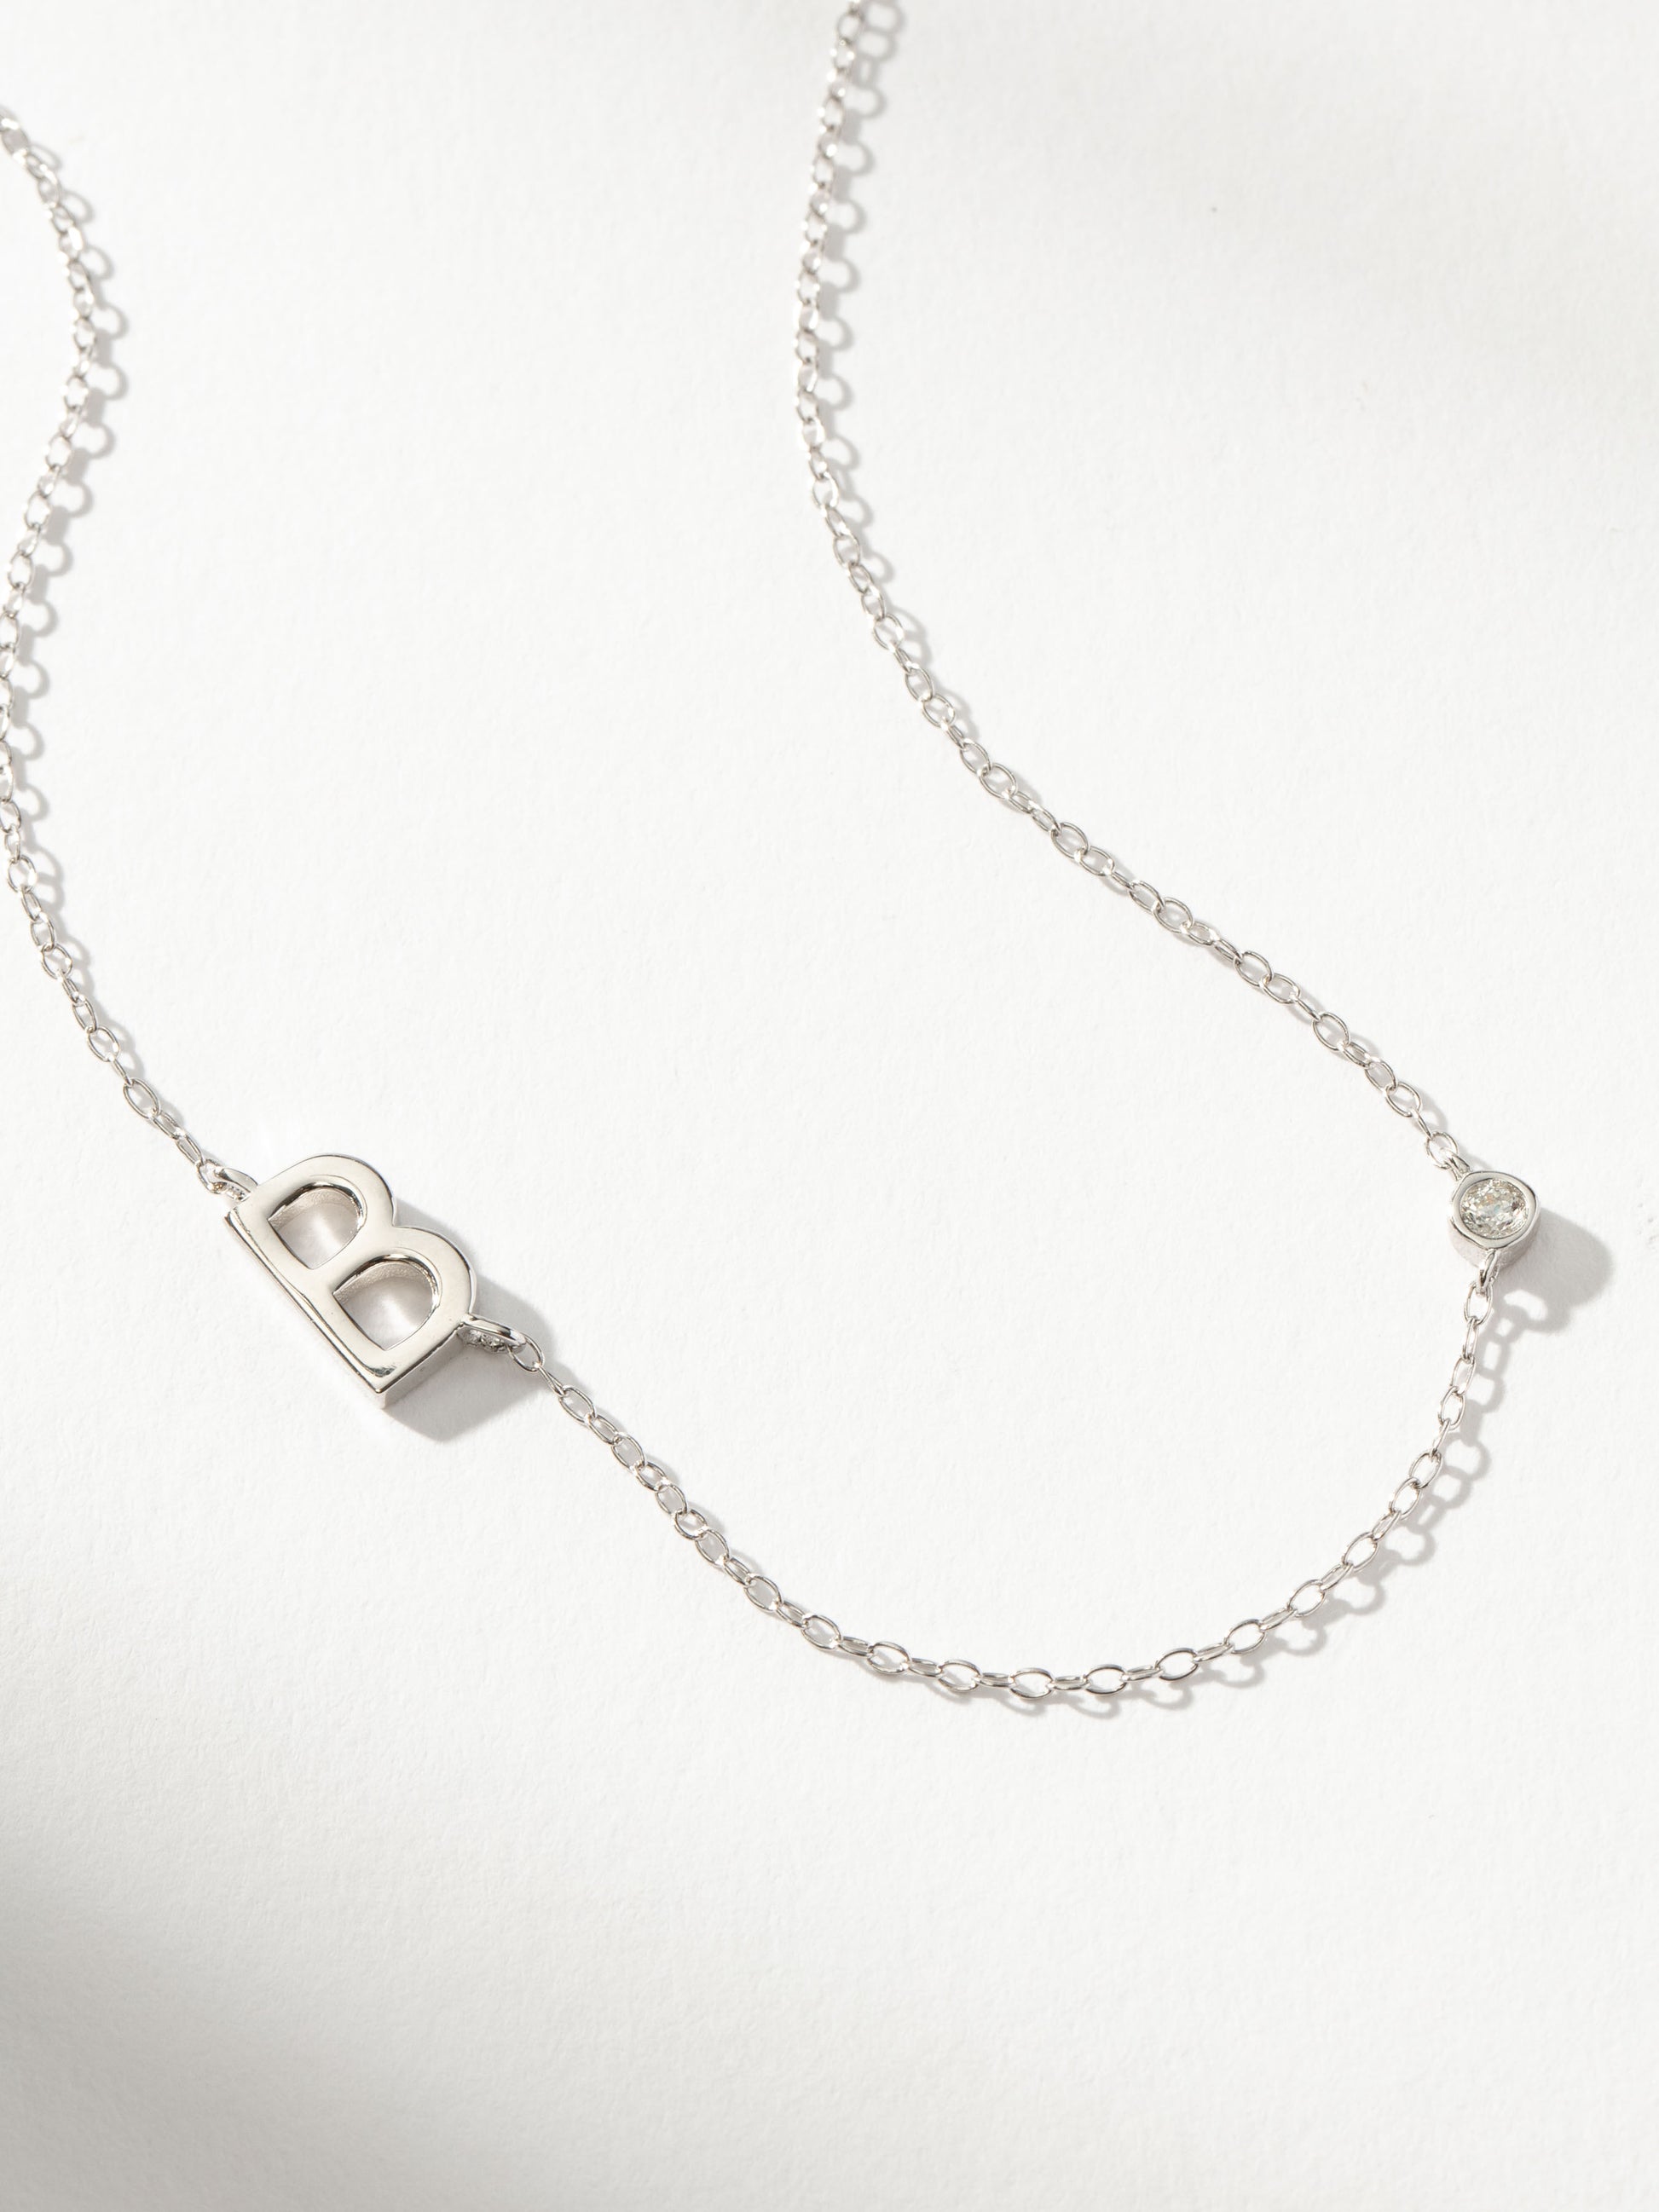 Personalized Touch Necklace | Sterling Silver B | Product Image | Uncommon James